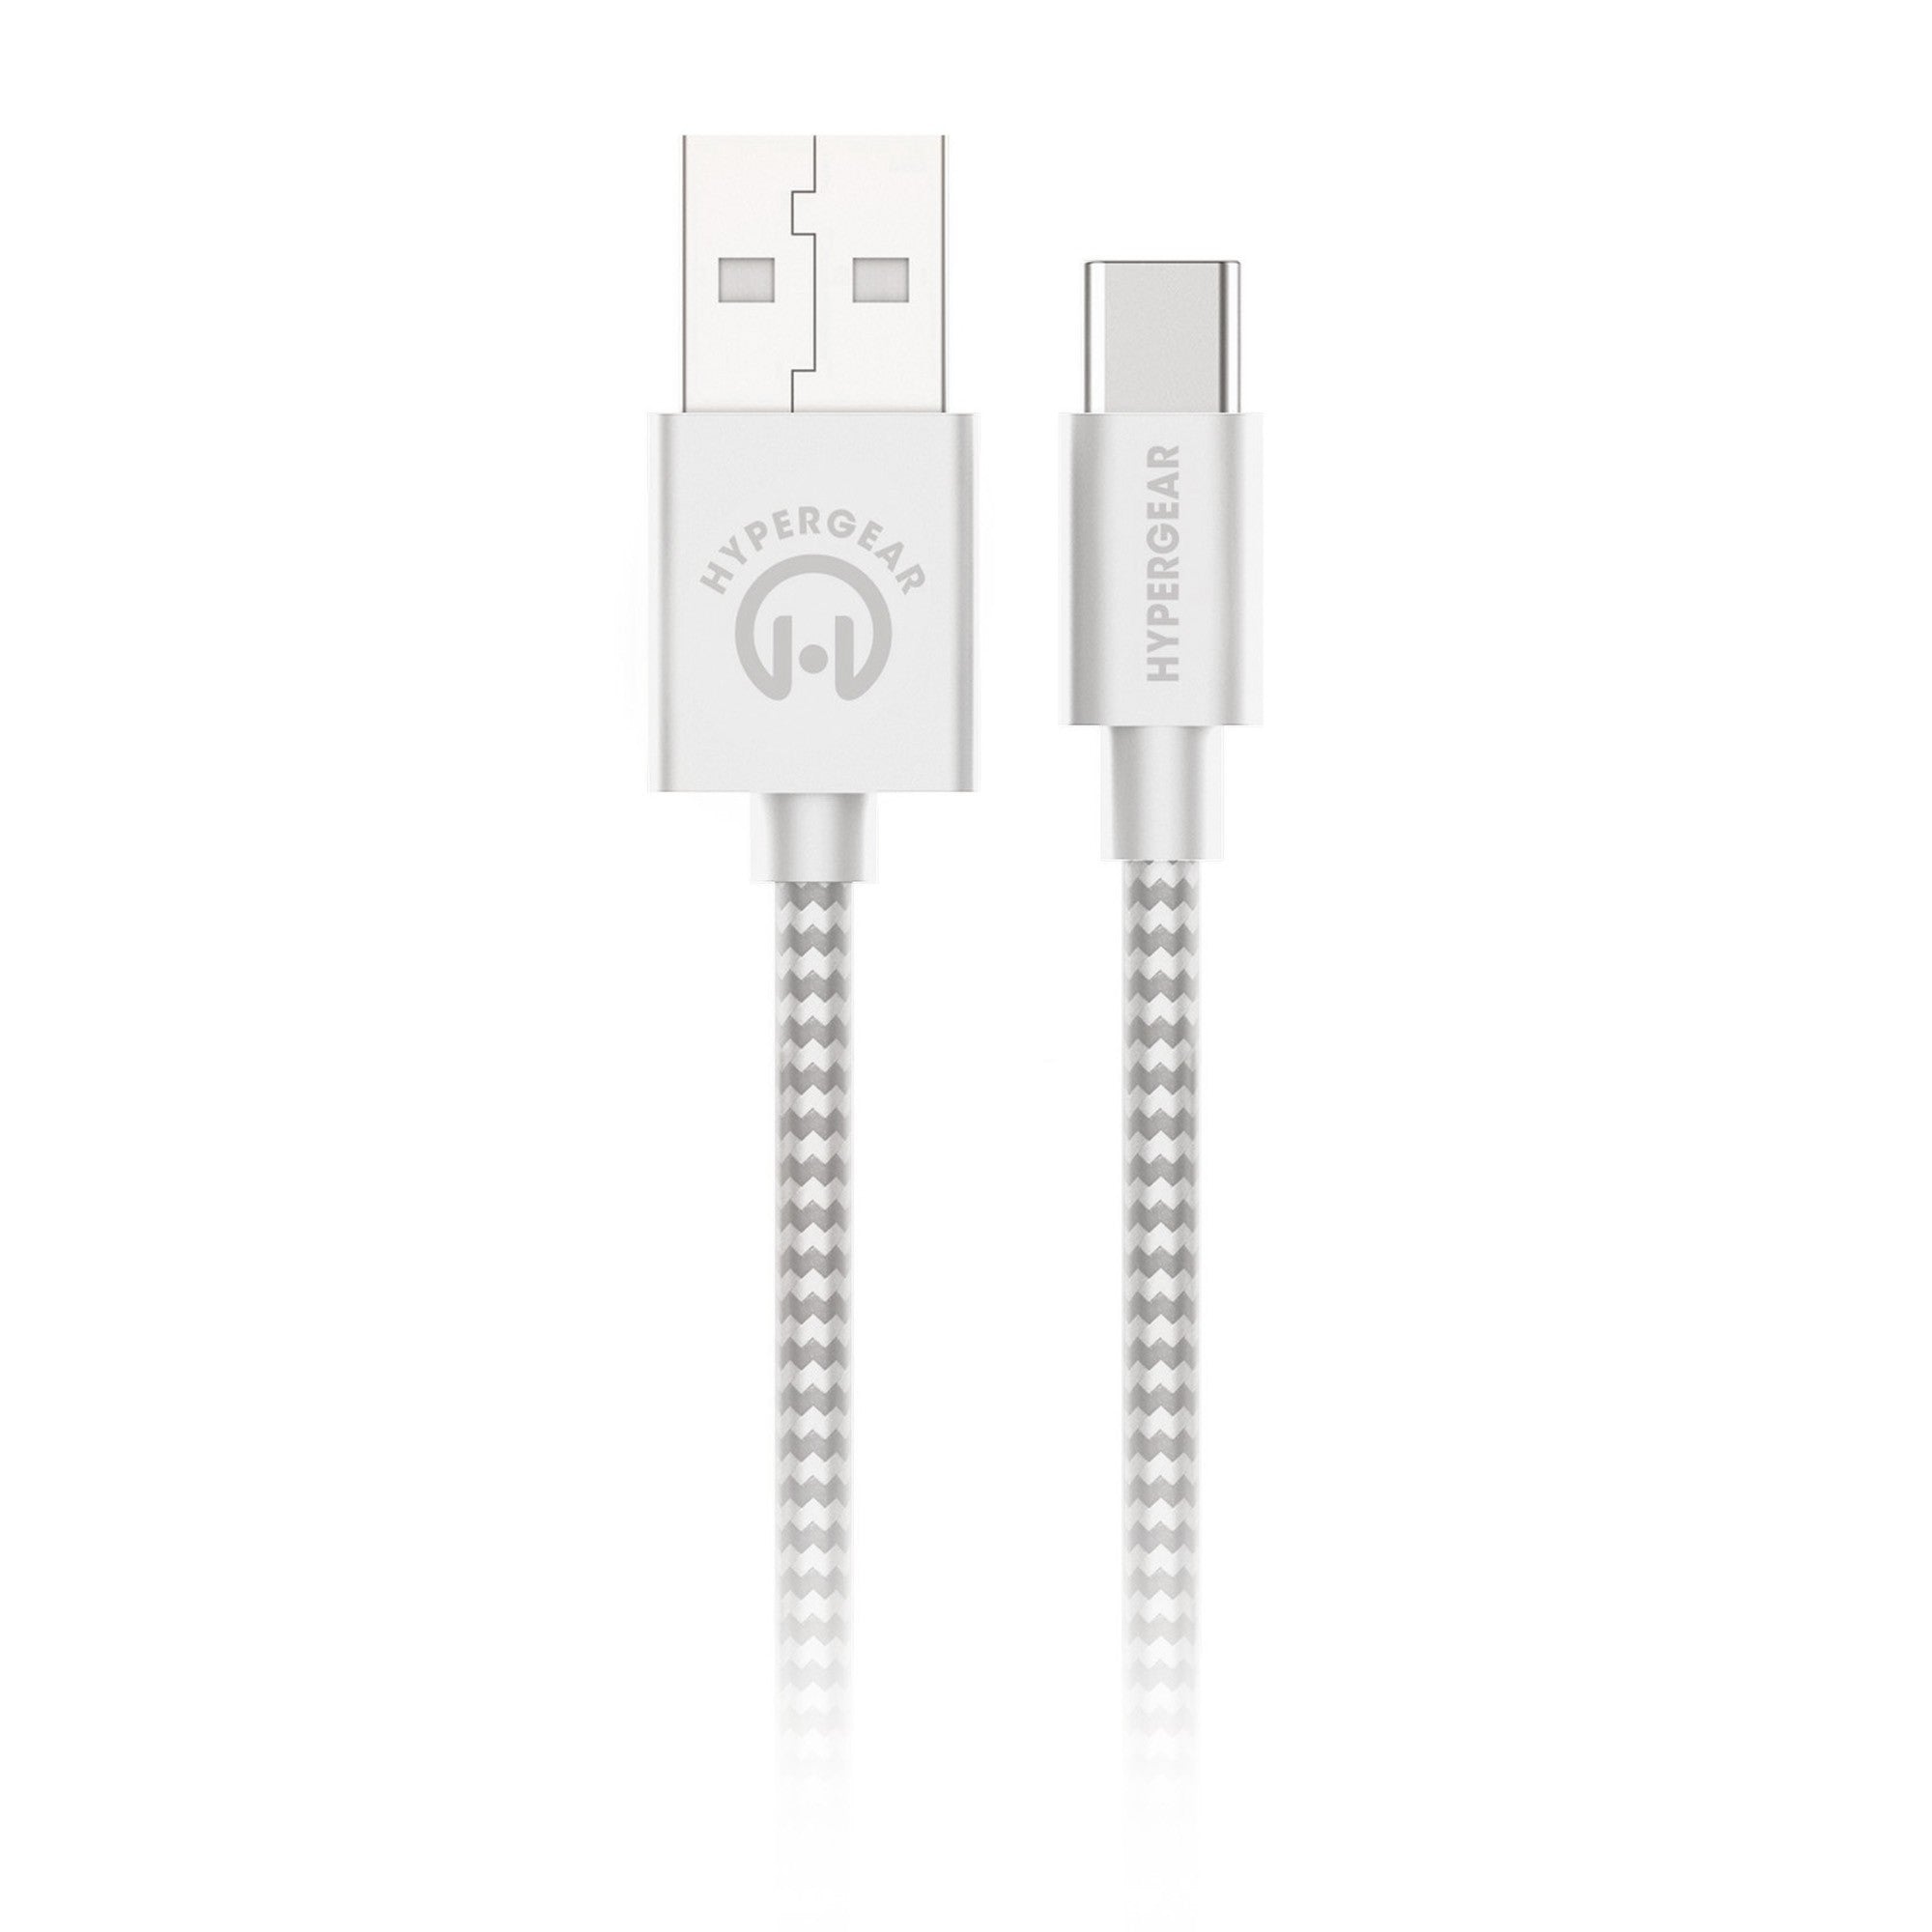 HyperGear 10 ft. (300cm) USB-A to USB-C Braided Charge and Sync Cable - White - 15-12117